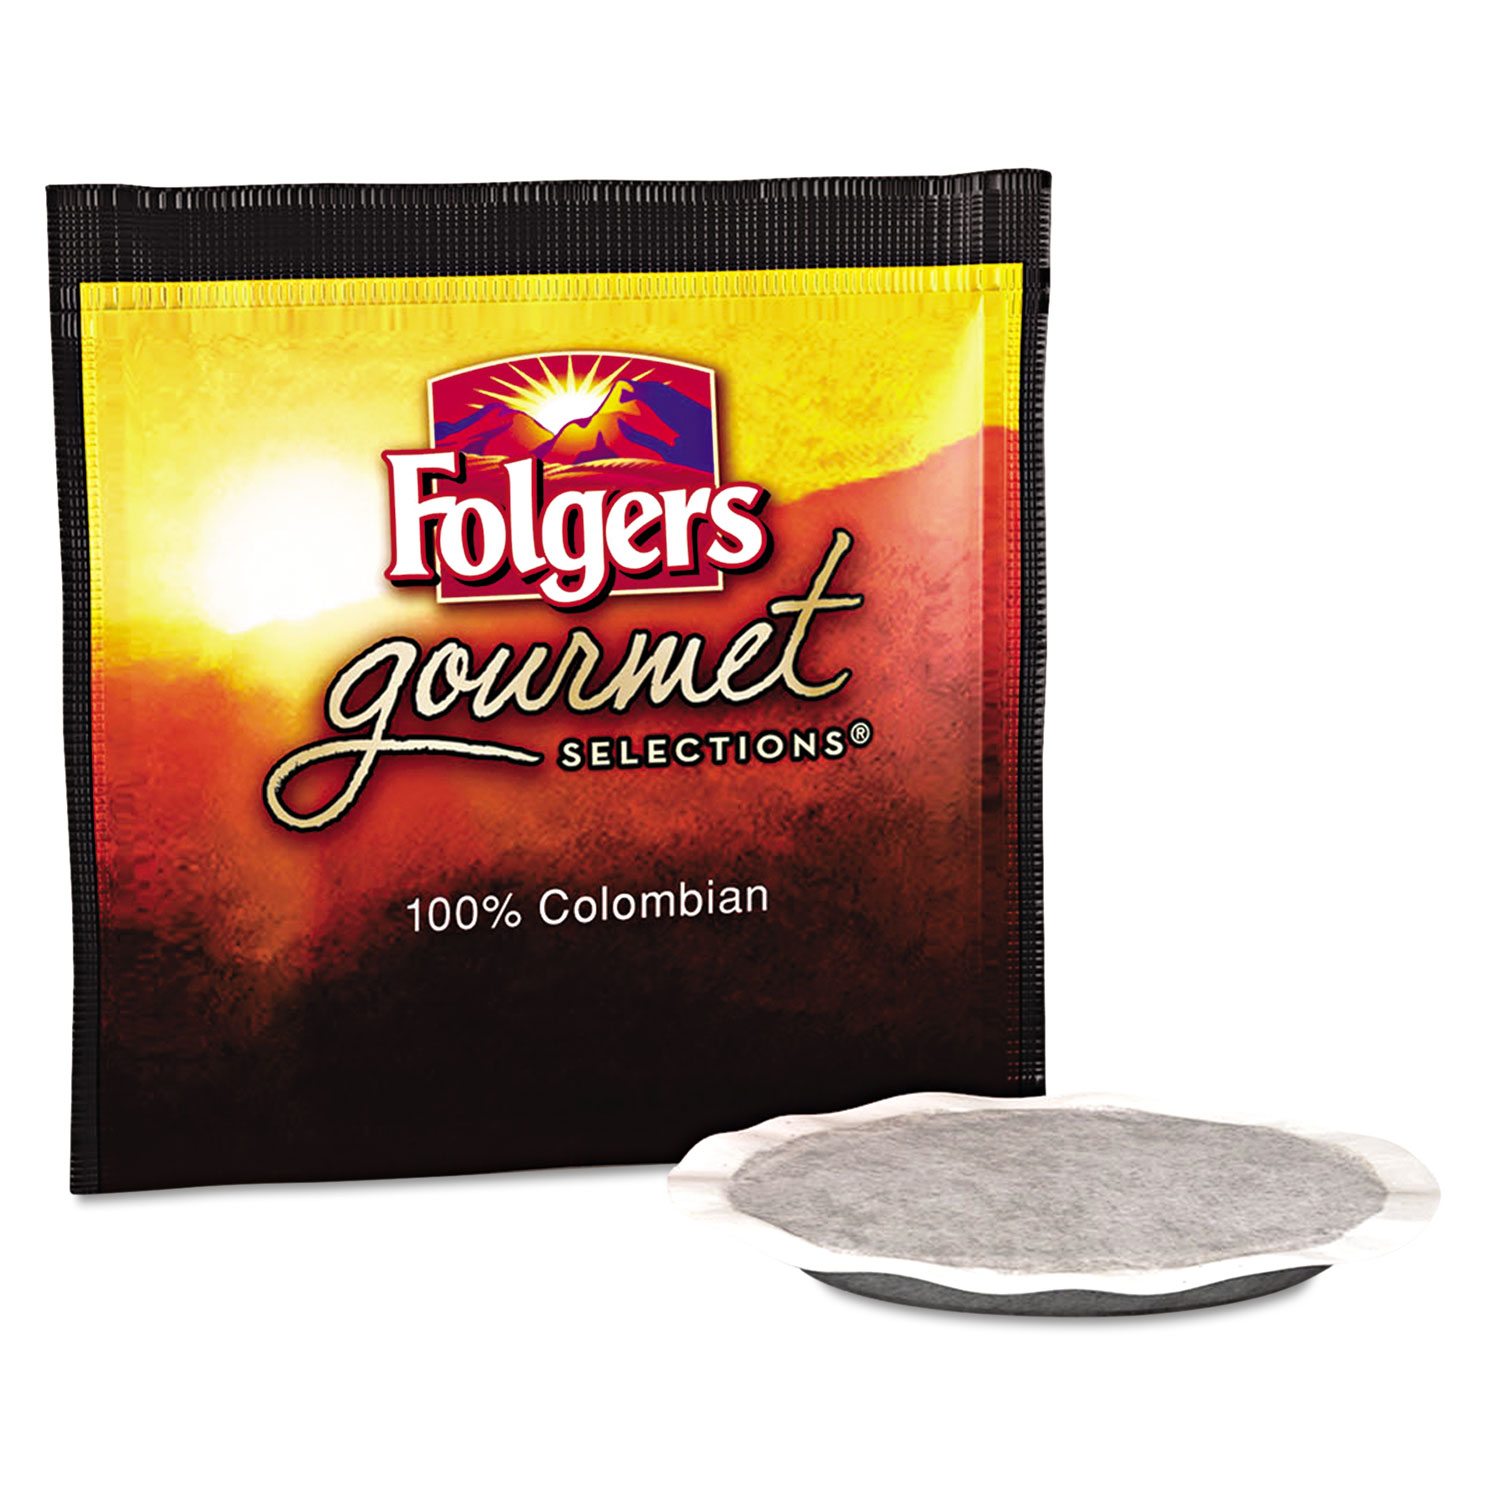  Folgers 63100 CASE Gourmet Selections Coffee Pods, 100% Colombian Regular, 18/Box, 6 Bx/Carton (FOL63100CT) 